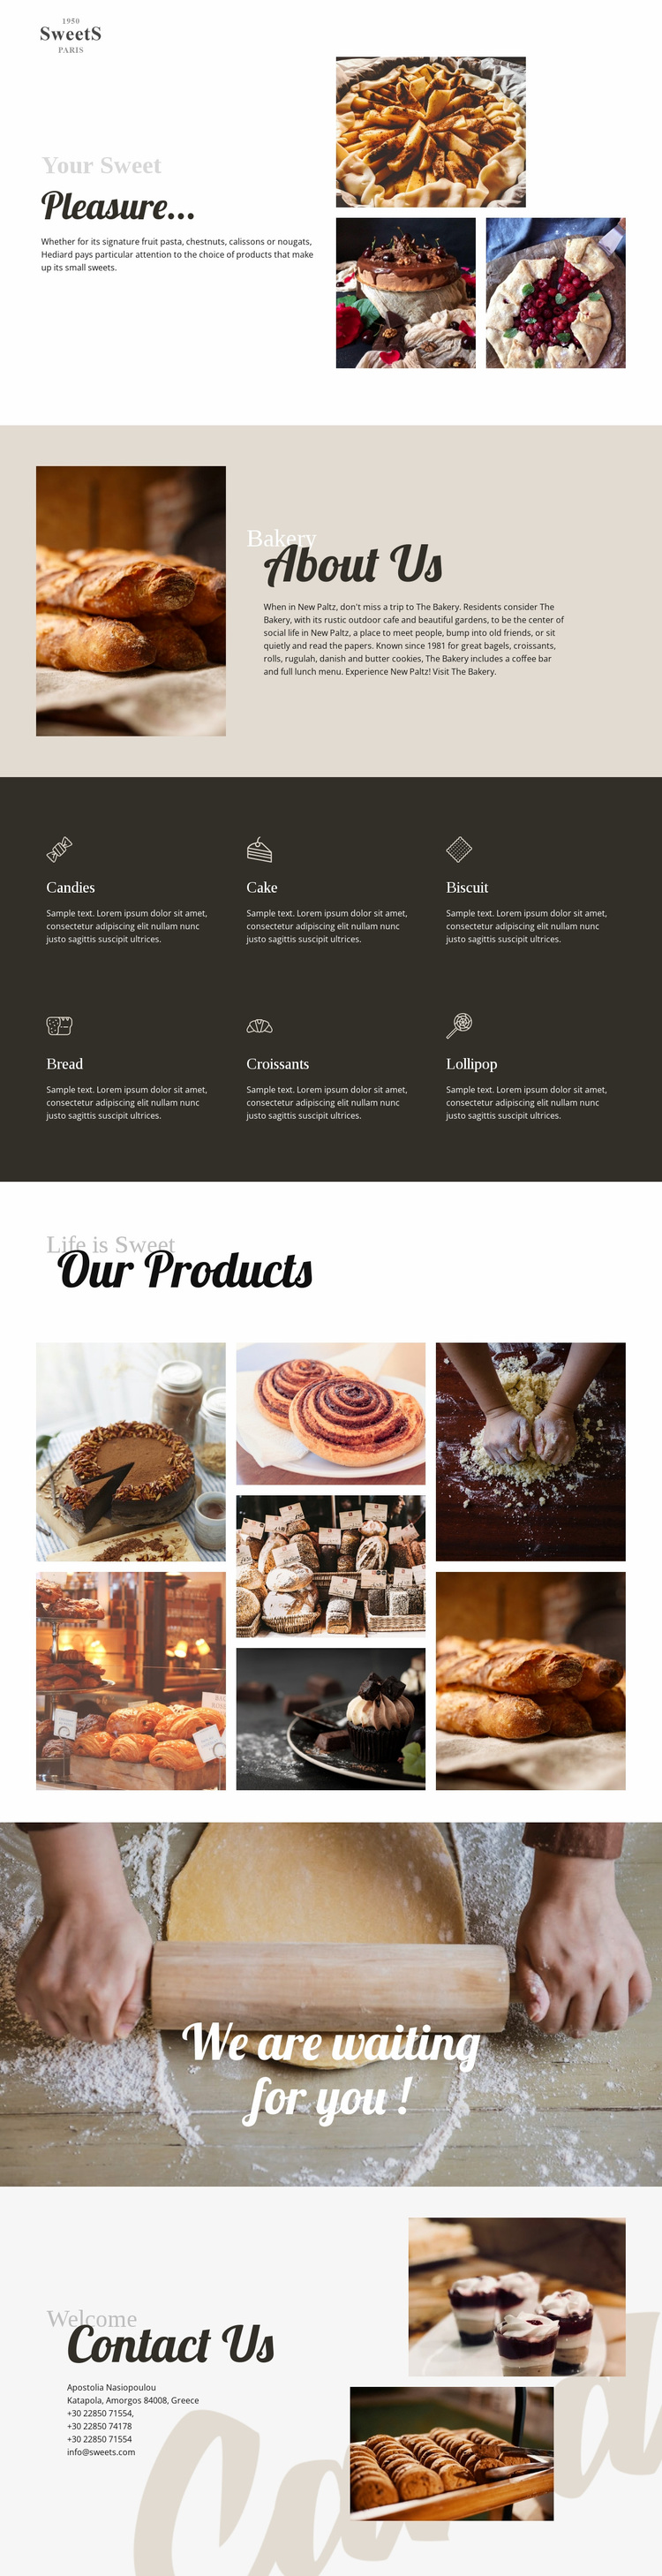 Cakes and baking food Website Design